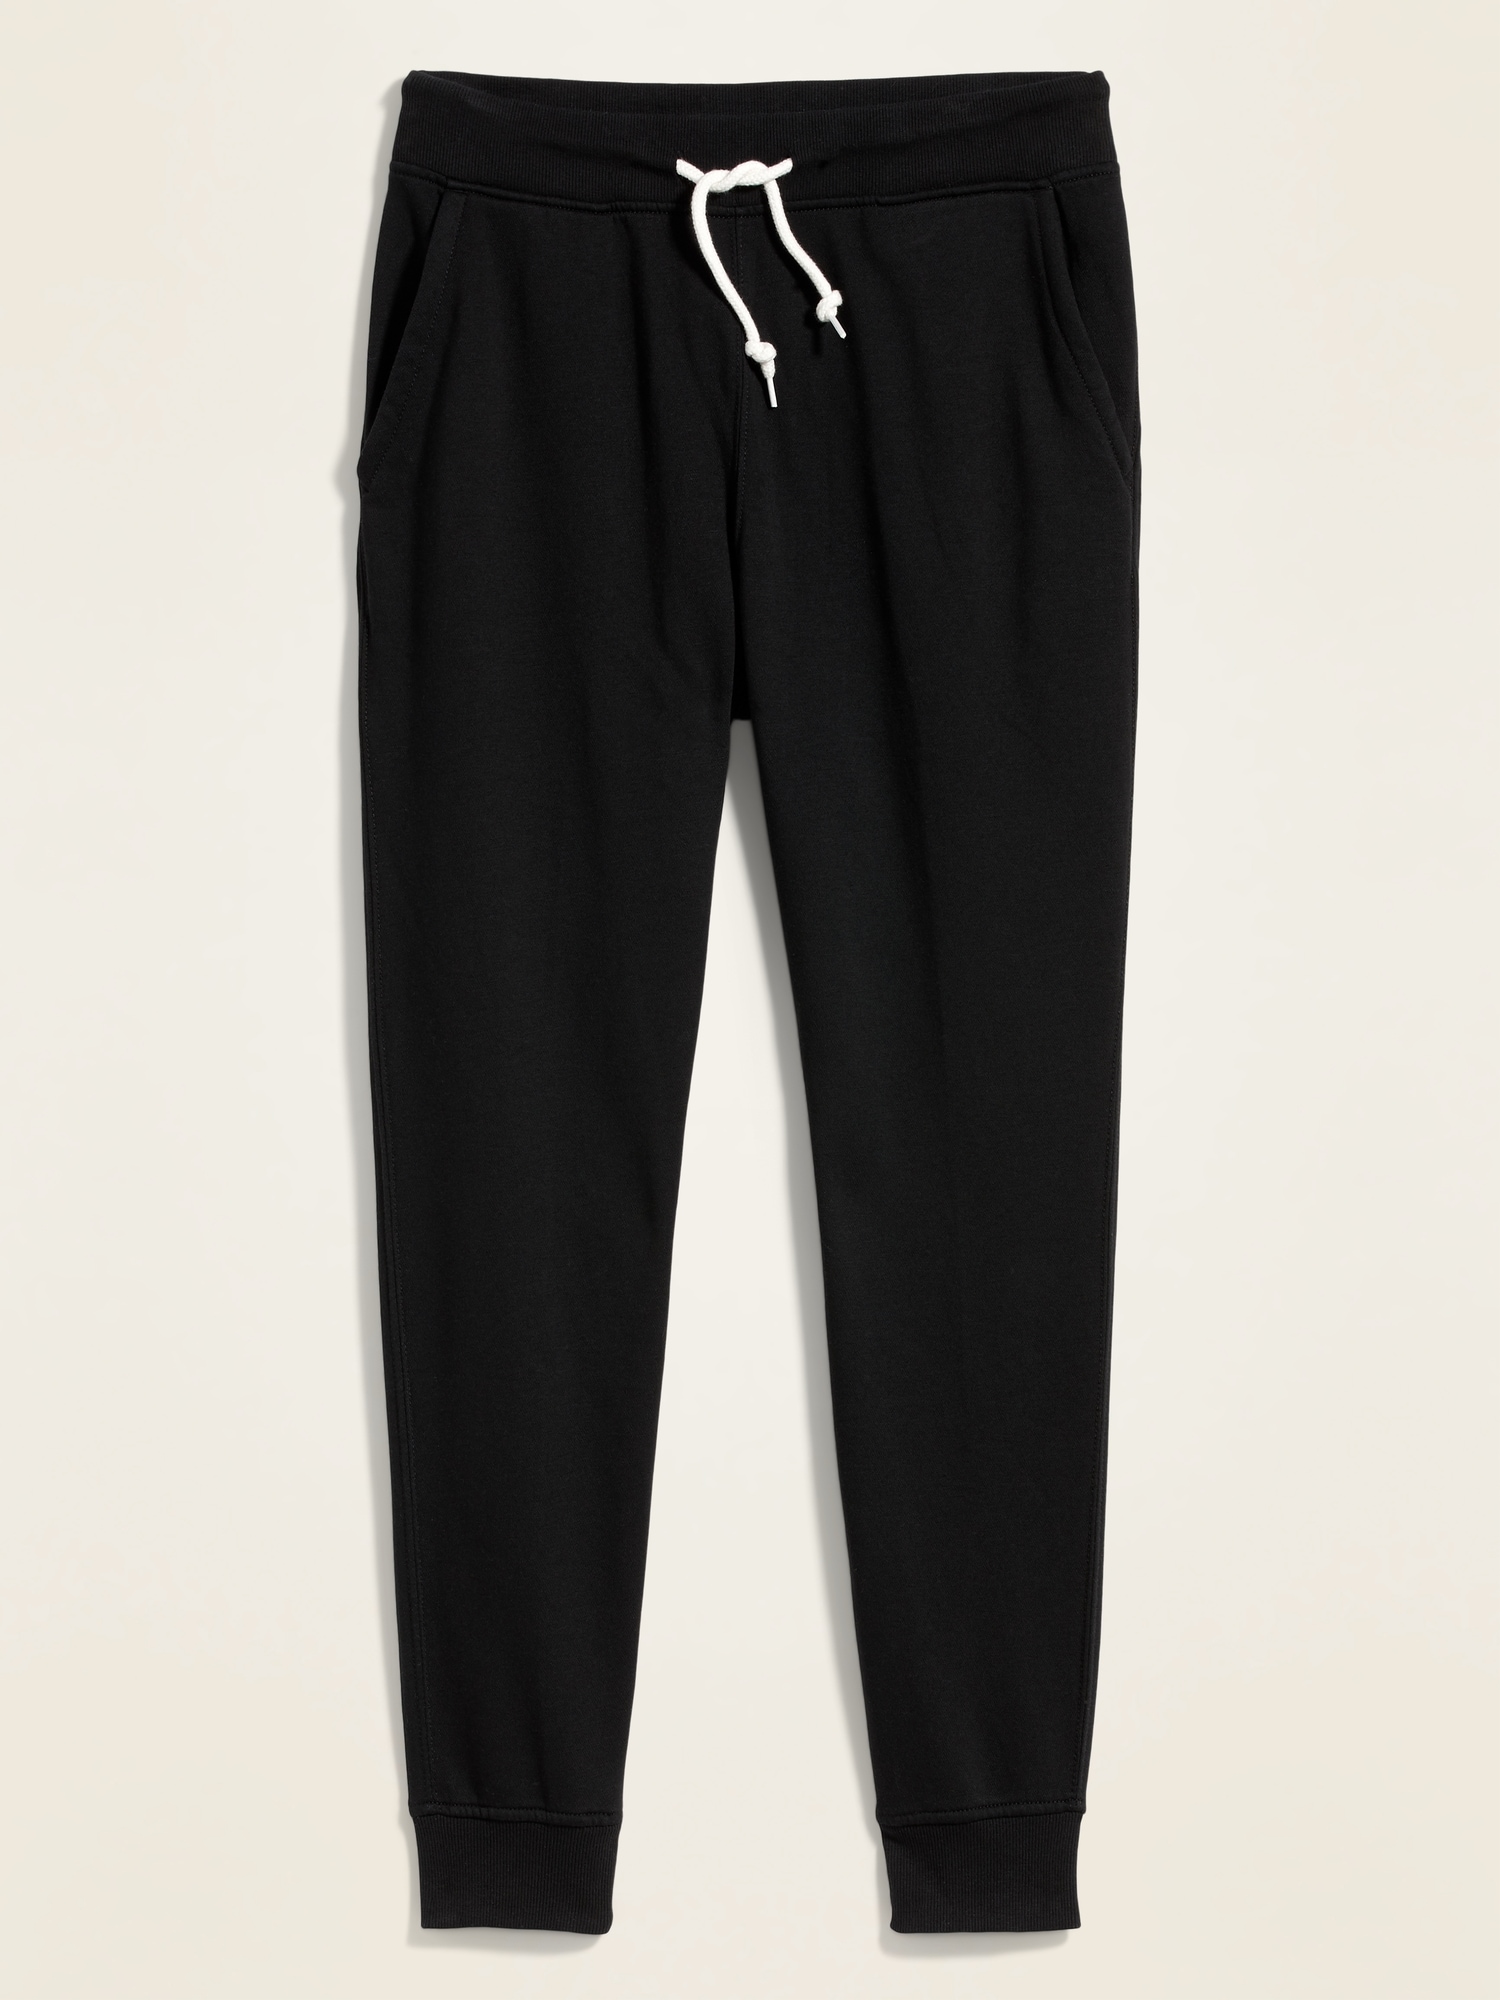 men's tapered track pants